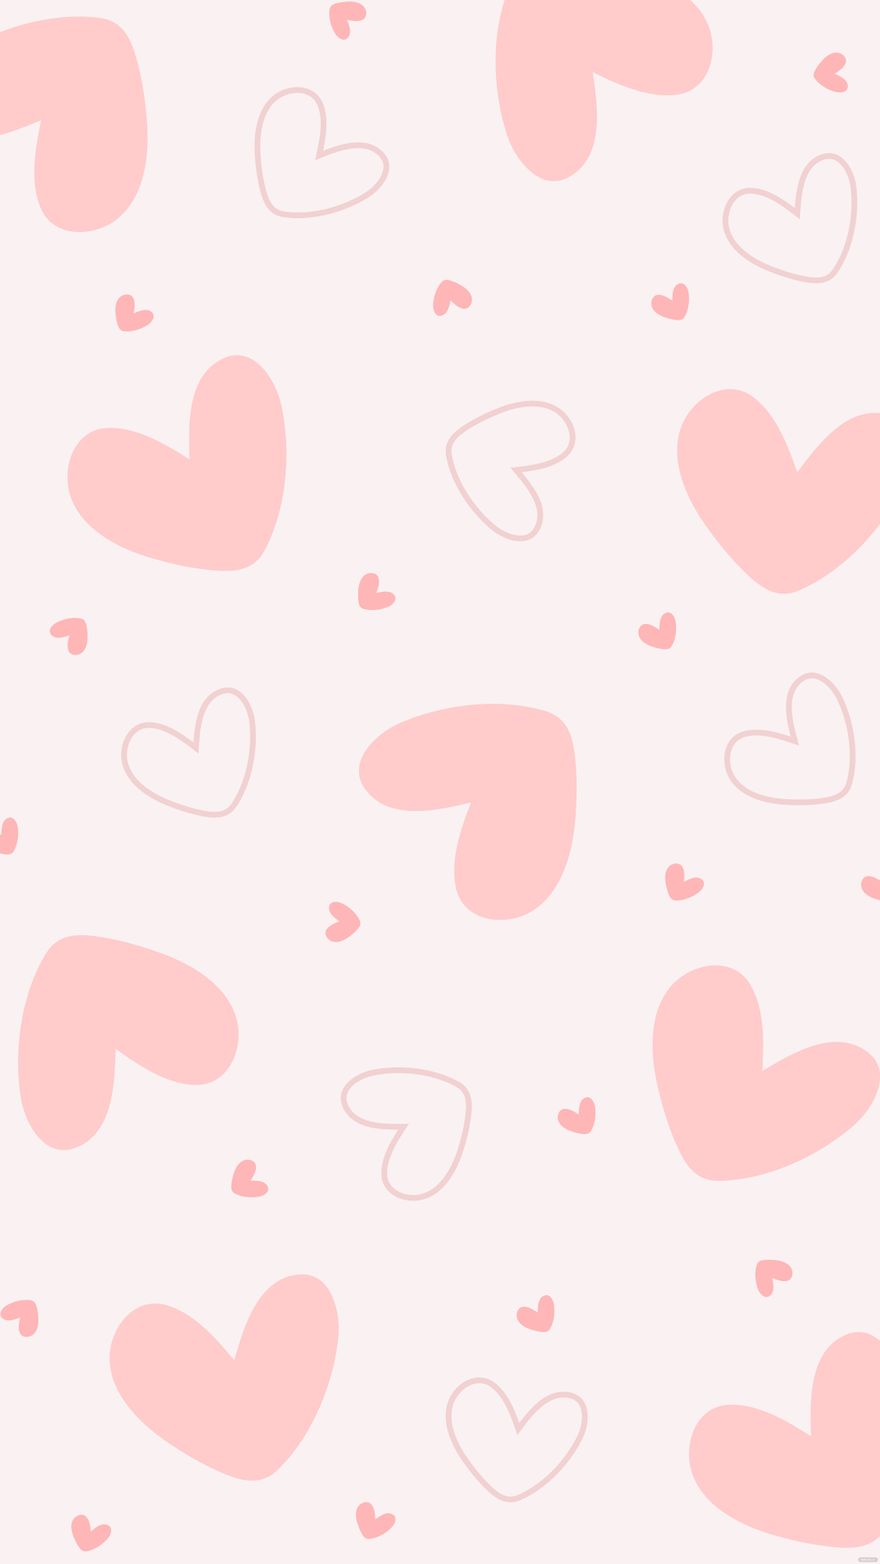 1120 Sparkle Pink Hearts and Bubbles Wallpaper Pink and Flowers   Android  iPhone HD Wallpaper Background Download HD Wallpapers Desktop  Background  Android  iPhone 1080p 4k 1080x1920 2023